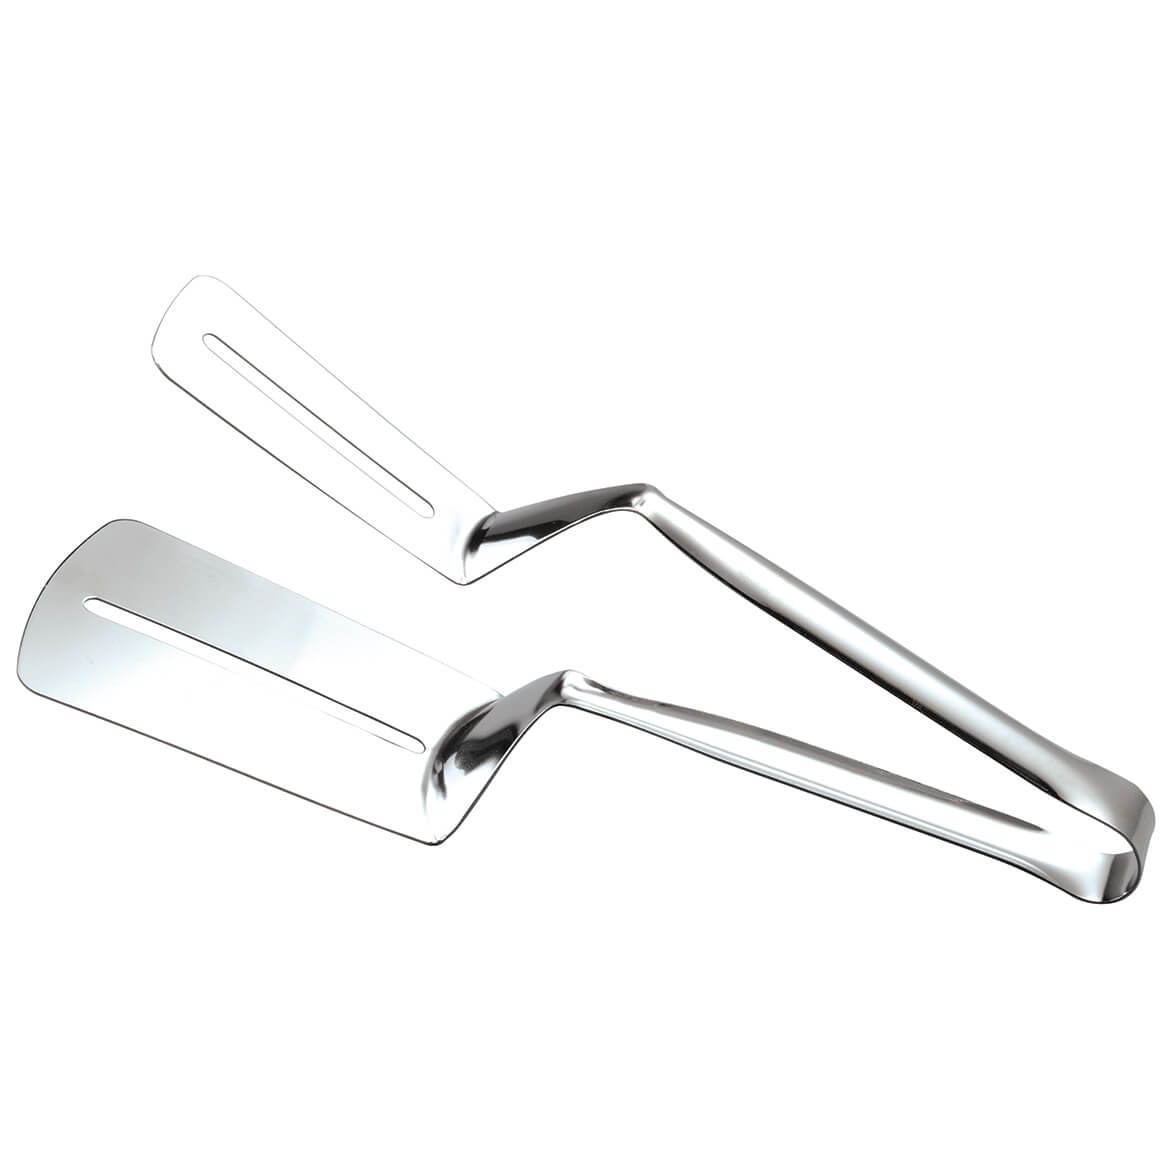 Stainless Steel Spatula Tongs + '-' + 373209